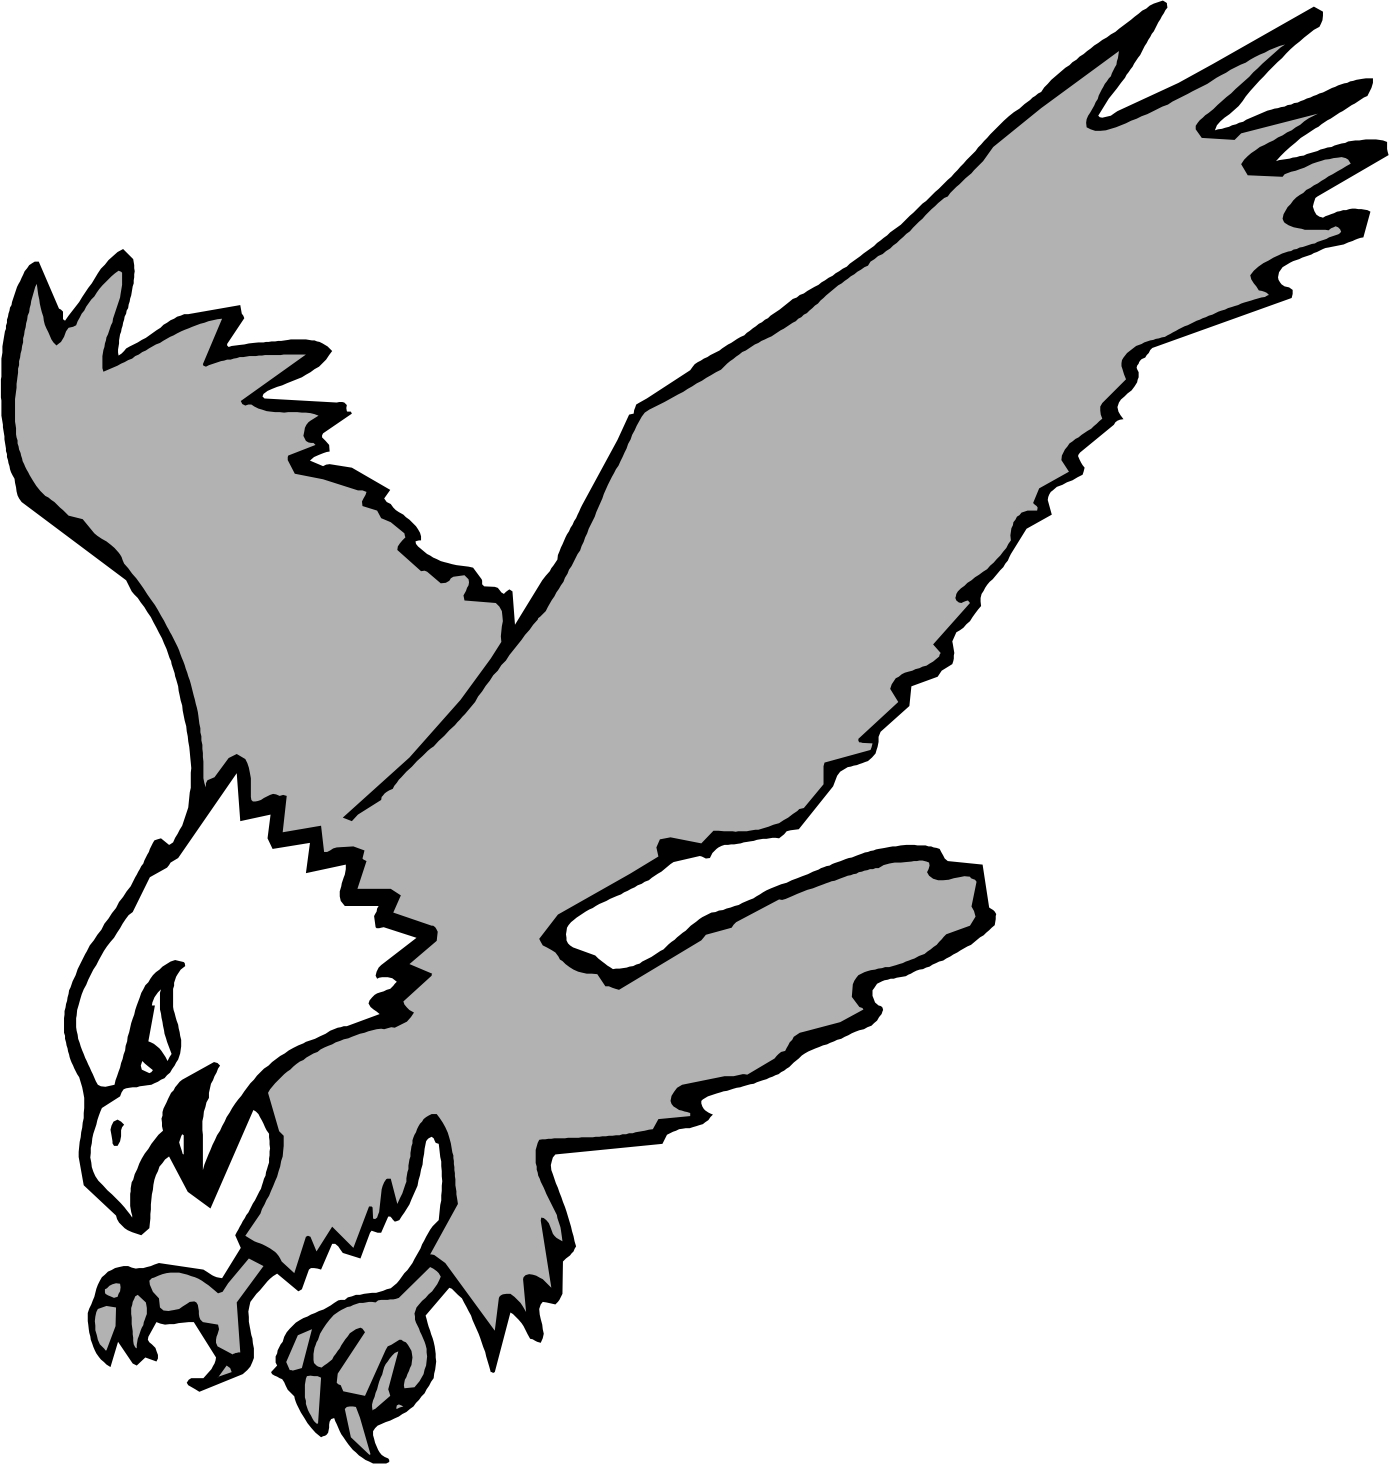 Cartoon Eagle | Page 3 - Clipart library - Clipart library